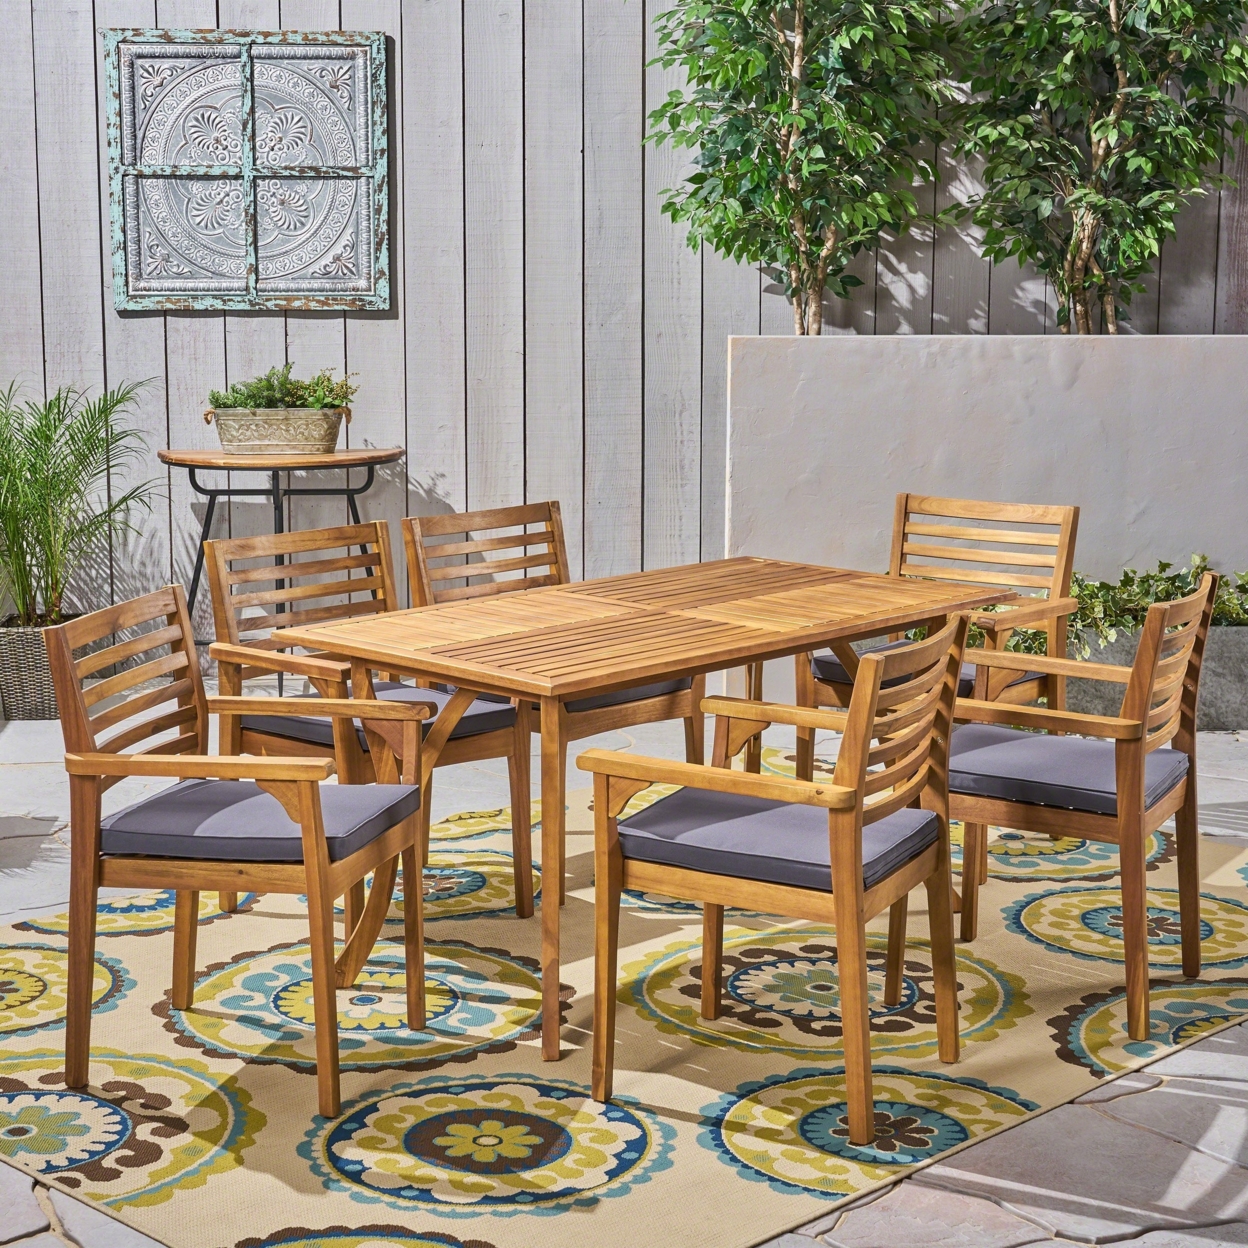 Phoenix Outdoor Acacia 6-Seater Dining Set With Cushions And 59 Rectangular Table With Carved Legs - Gray